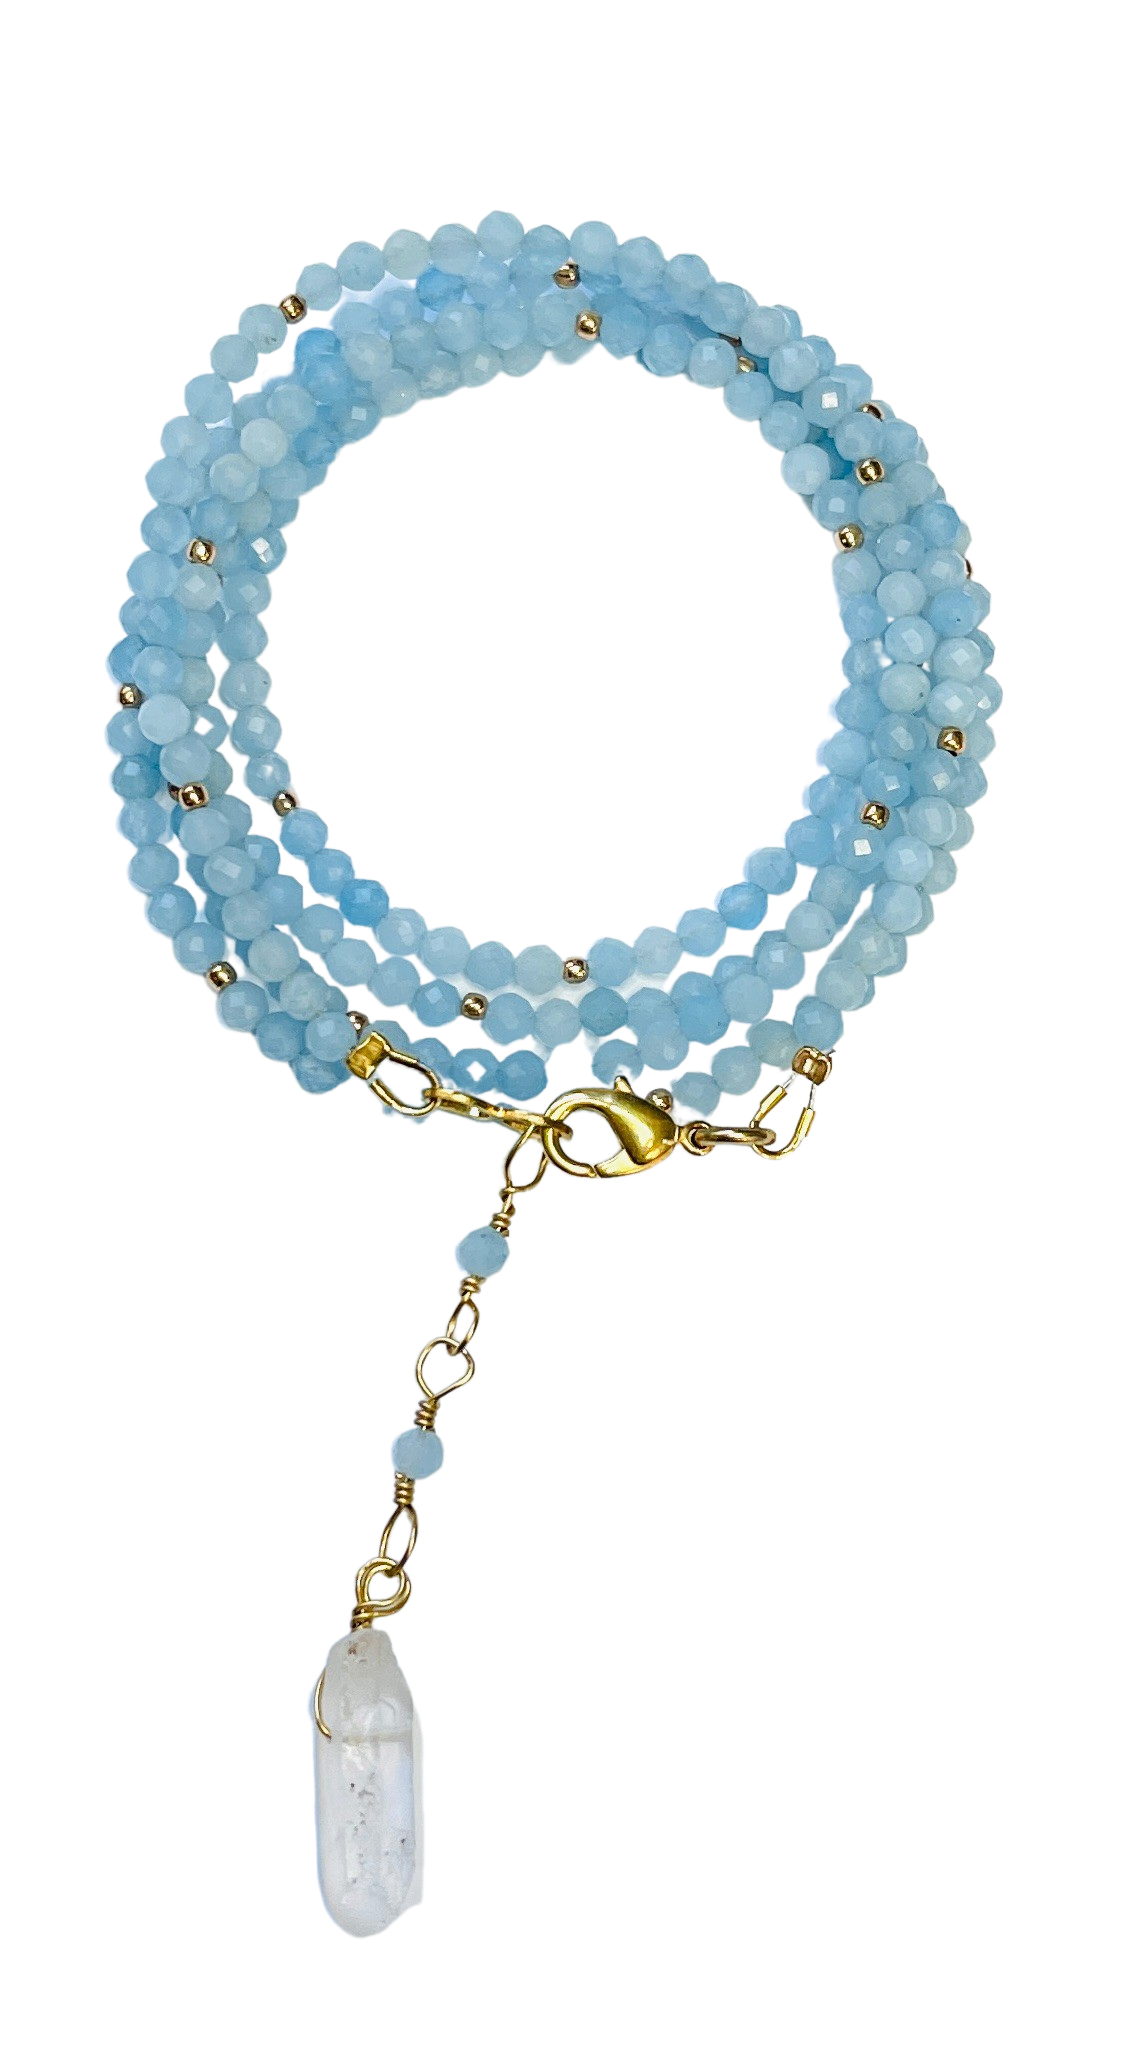 Aquamarine Waters Moon Crystal Point Necklace/Bracelet